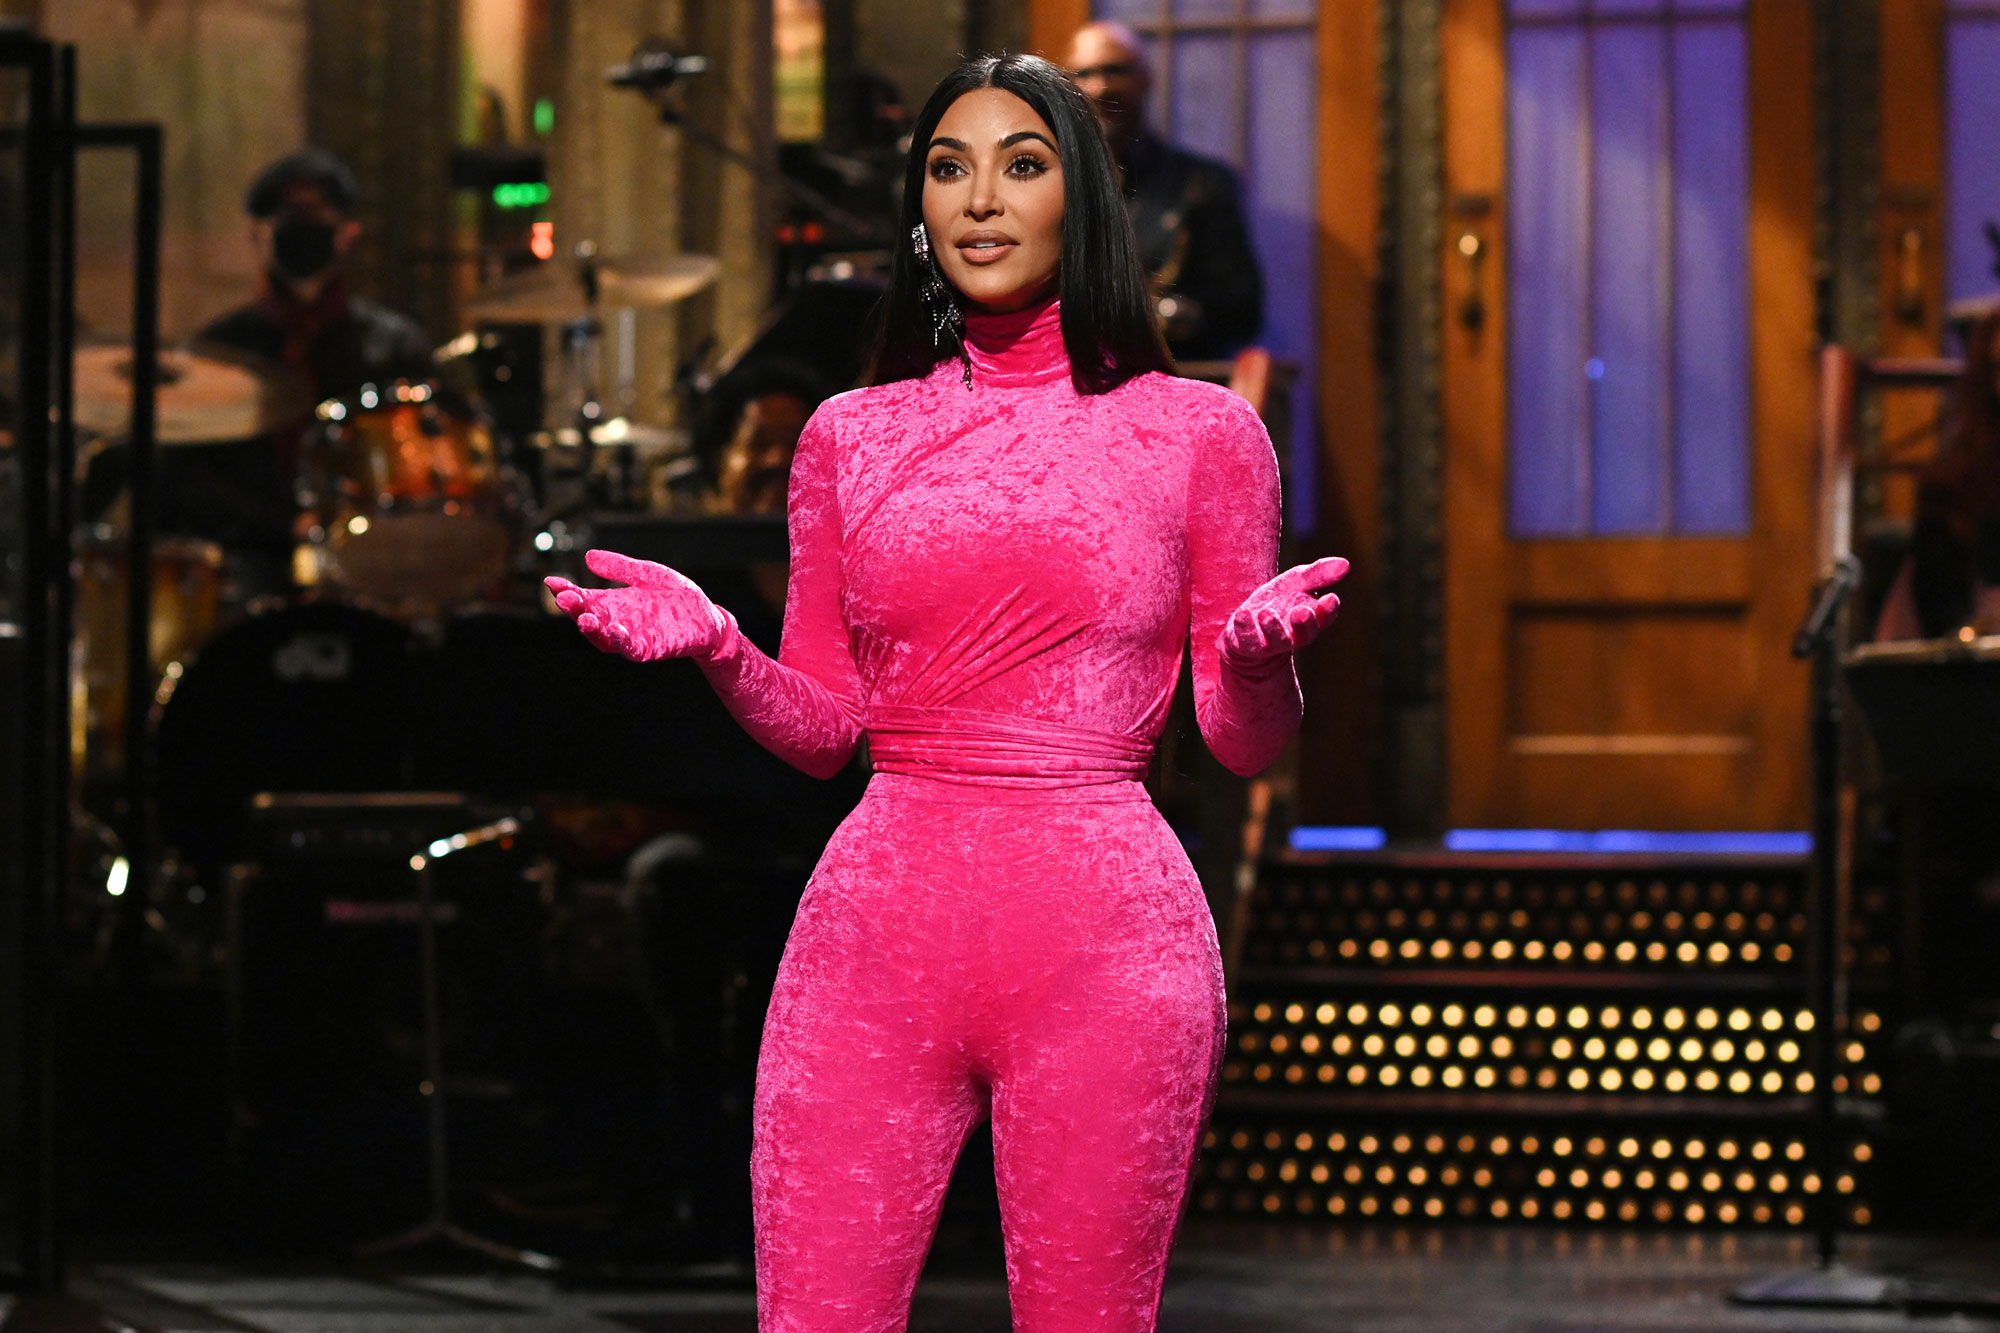 Kim Kardashian wears an outfit that shows off her figure as she